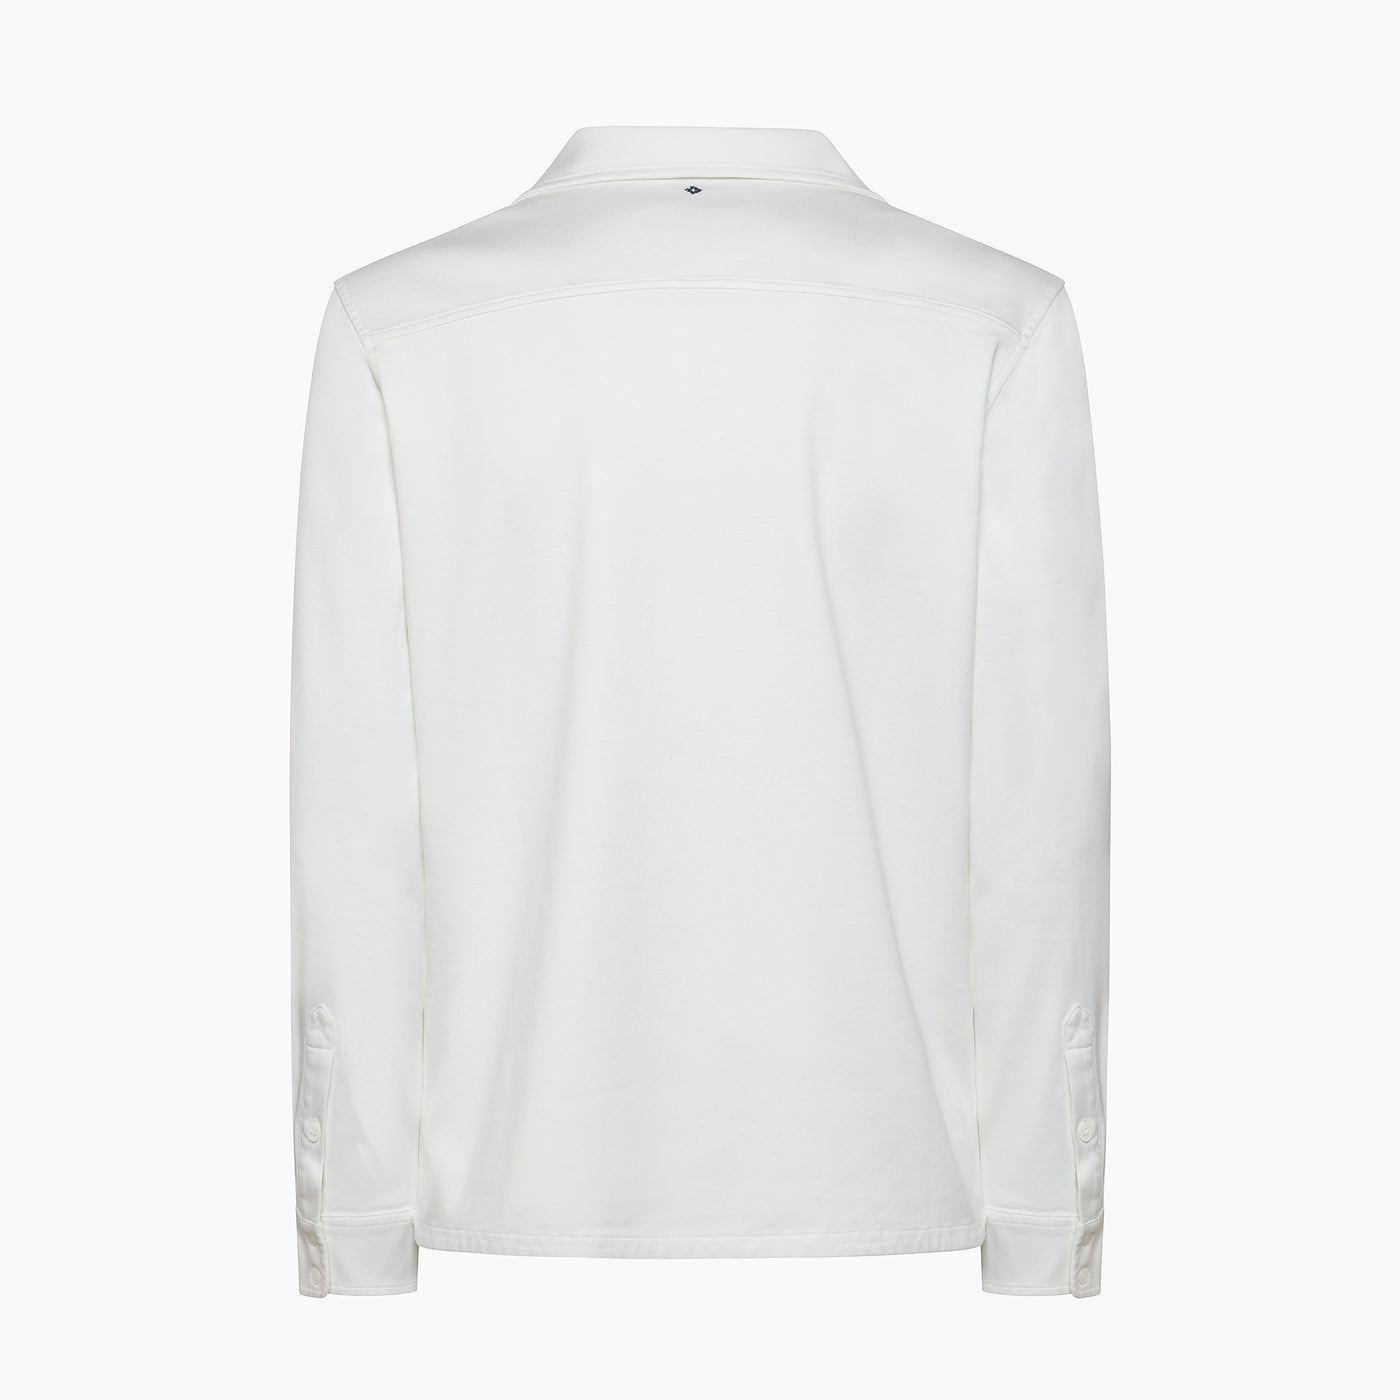 Thierry Polo long sleeves in jersey interlock